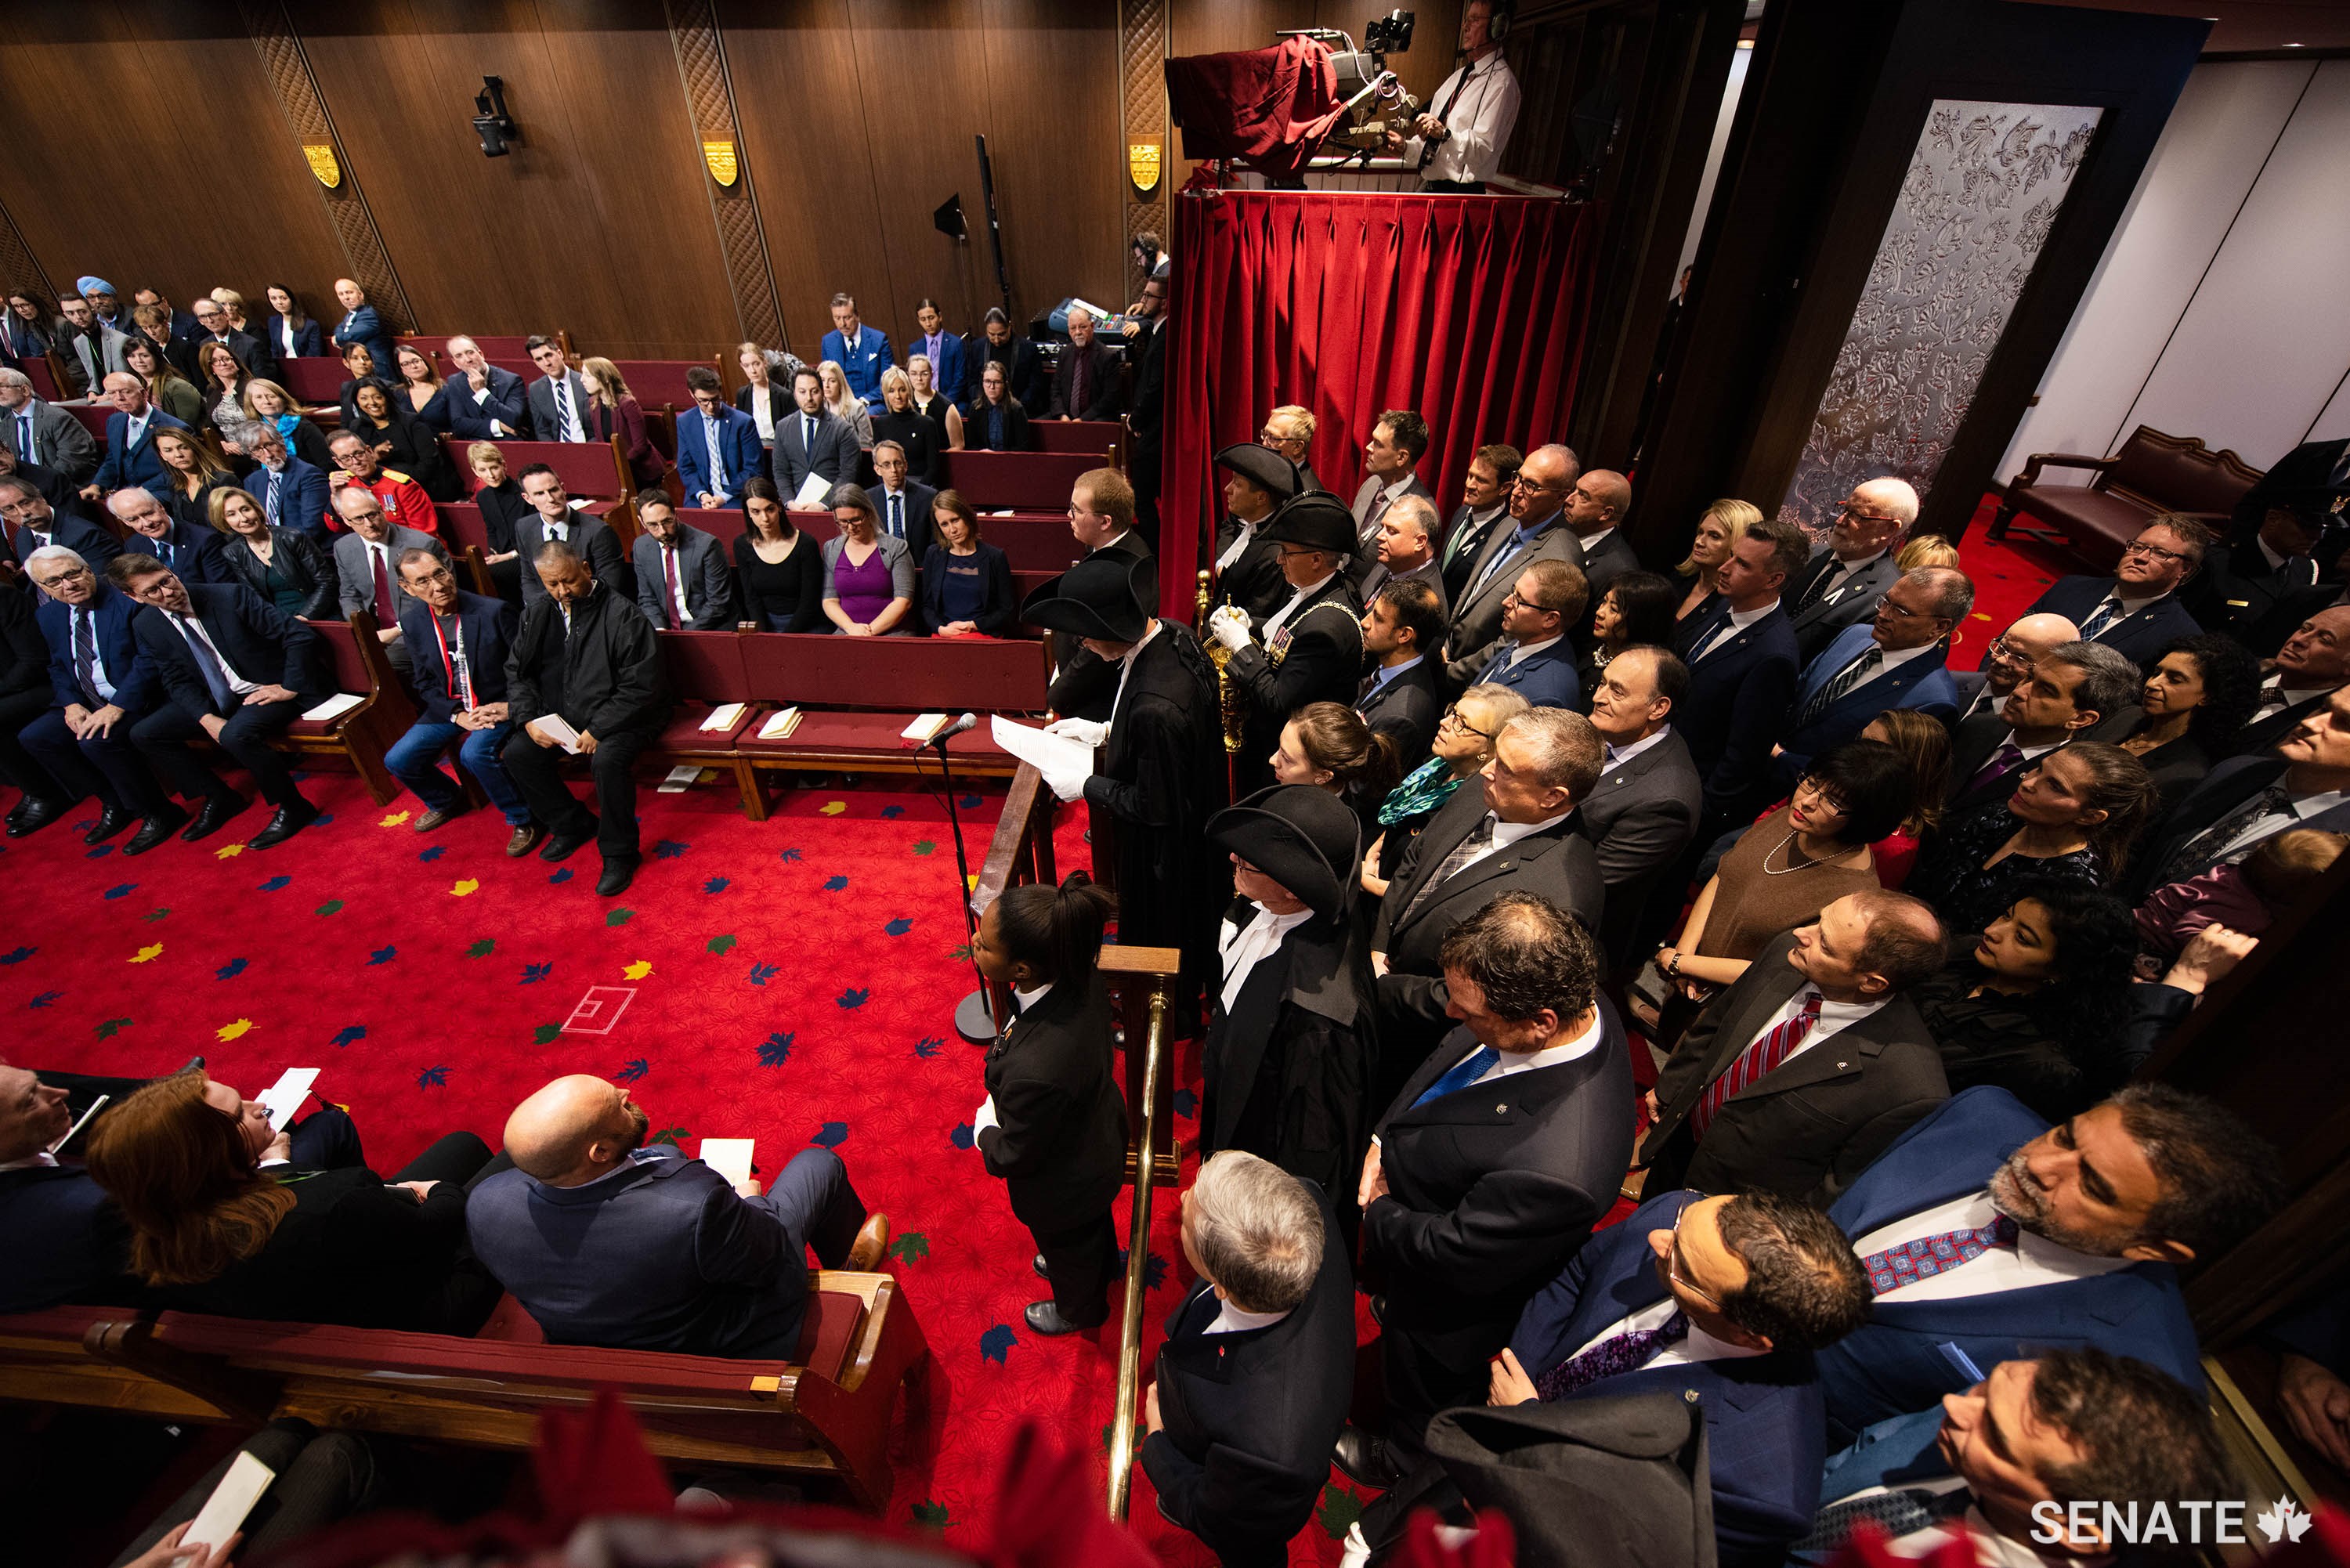 In a stark contrast from 2020, dozens of MPs filled the Senate entrance during the Speech from the Throne on December 5, 2019, as senators and several other invited guests inside the crowded Chamber looked on.